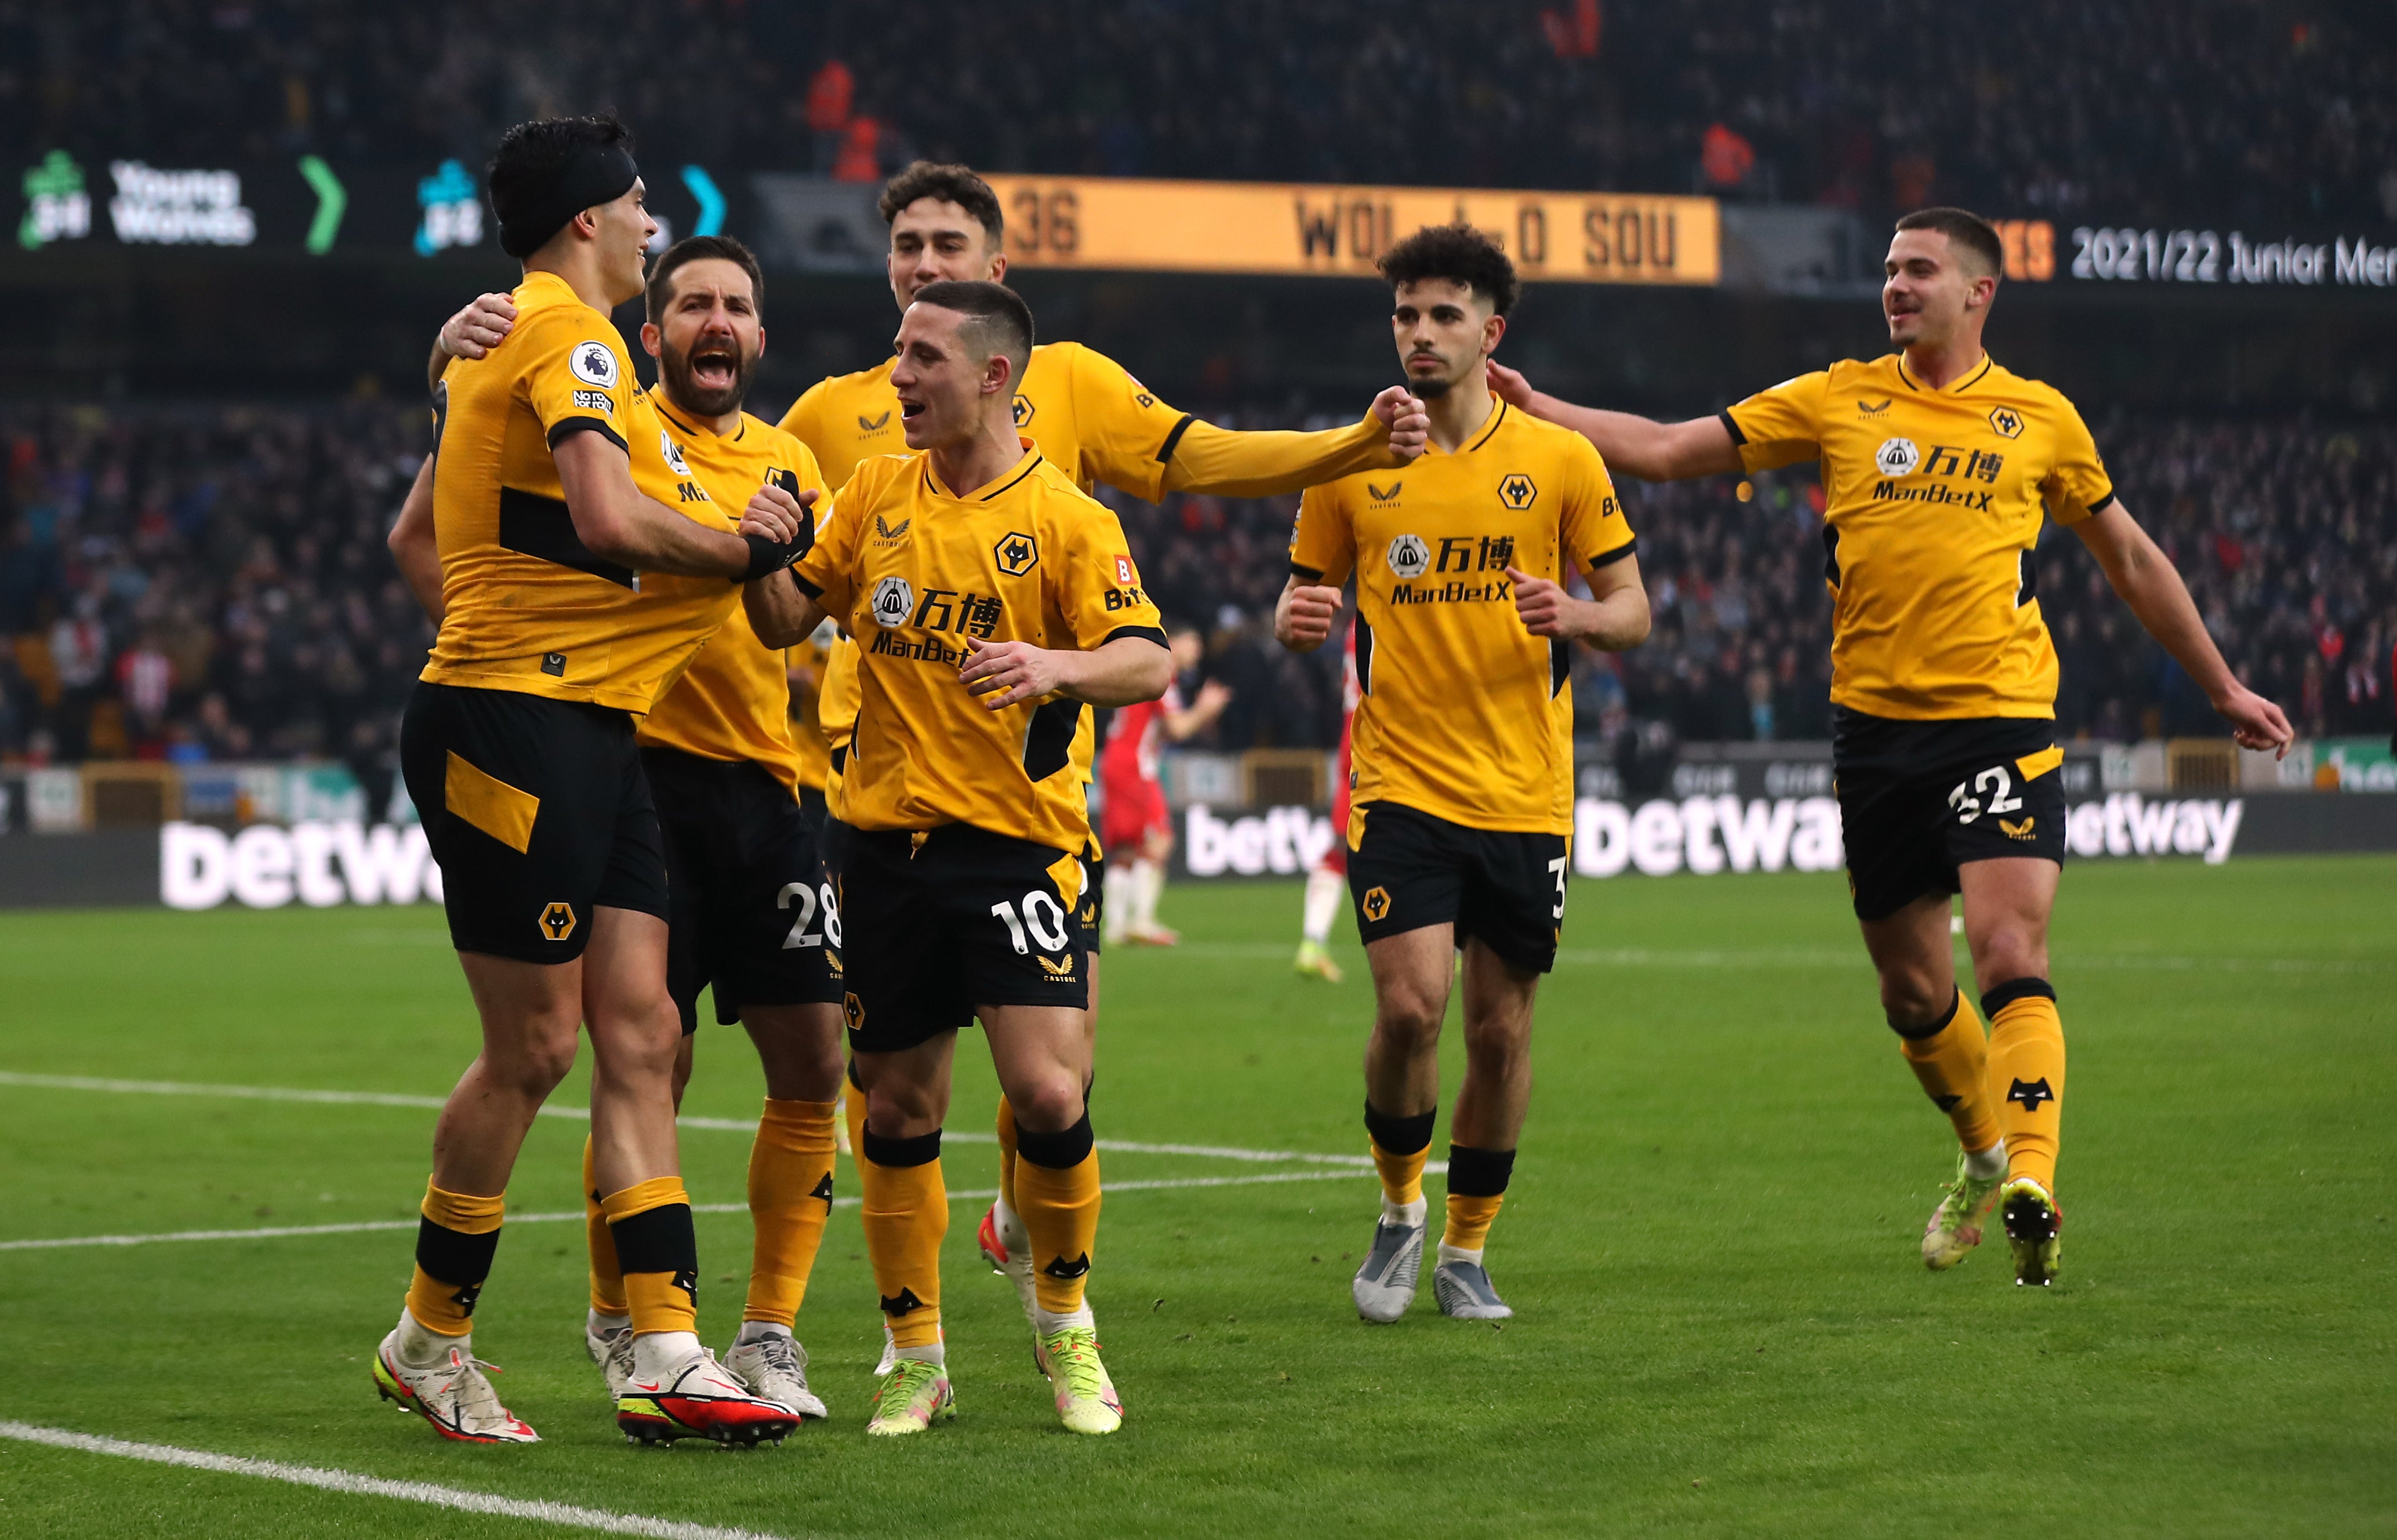 Wolves will overtake Tottenham in the Premier League table if they win on Sunday (Bradley Collyer/PA)